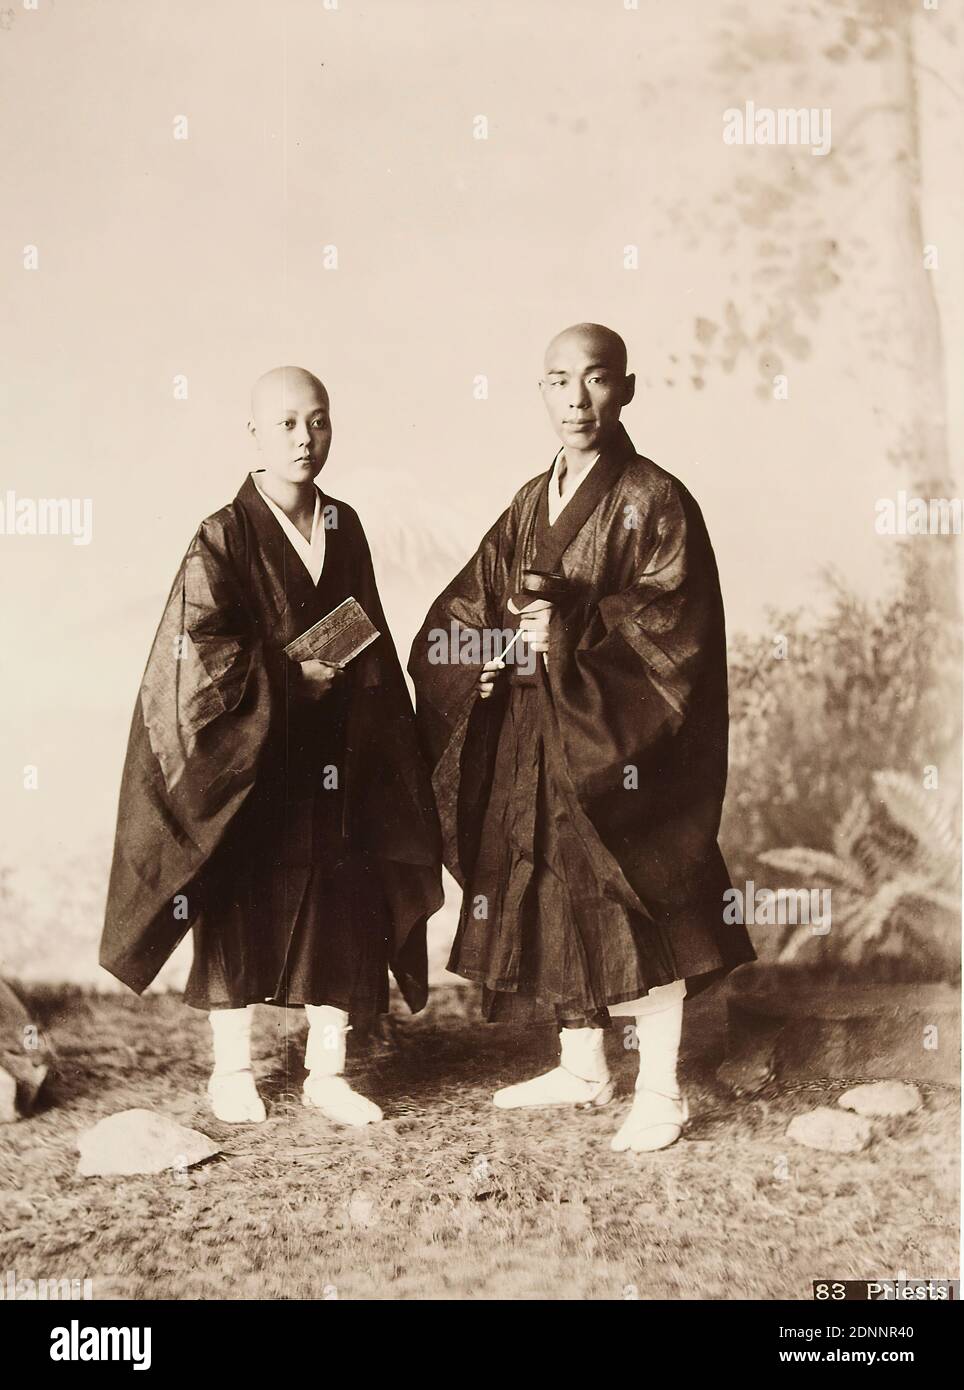 Priests, albumin paper, black and white positive process, total: height: 17.90 cm; width: 12.50 cm, titled, 83 Priests, travel photography, portrait photography, religious officials (Hinduism, Buddhism, Jainism Stock Photo